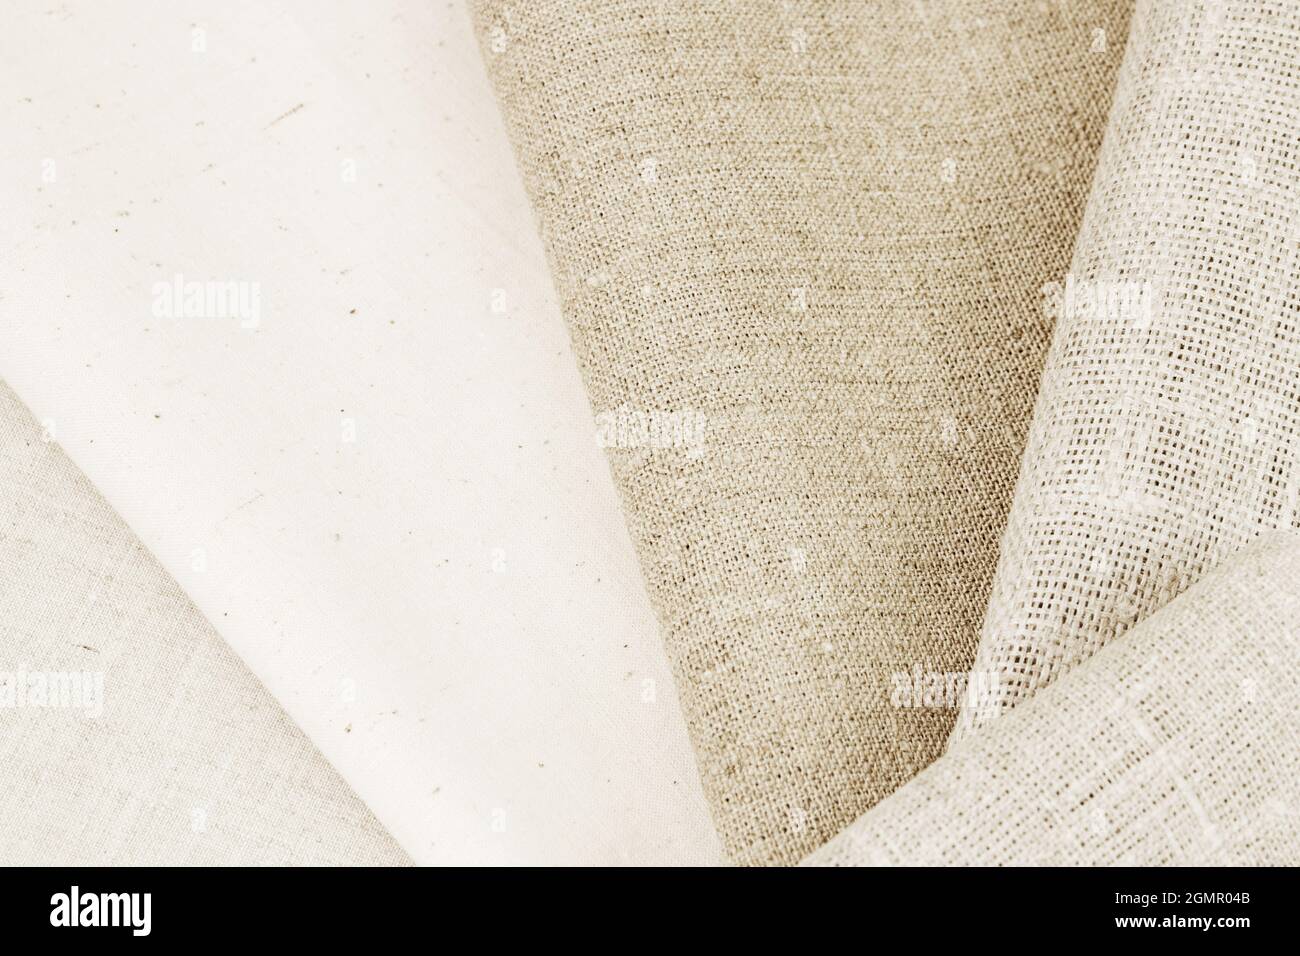 Various natural rough of cotton and flax fabric Stock Photo